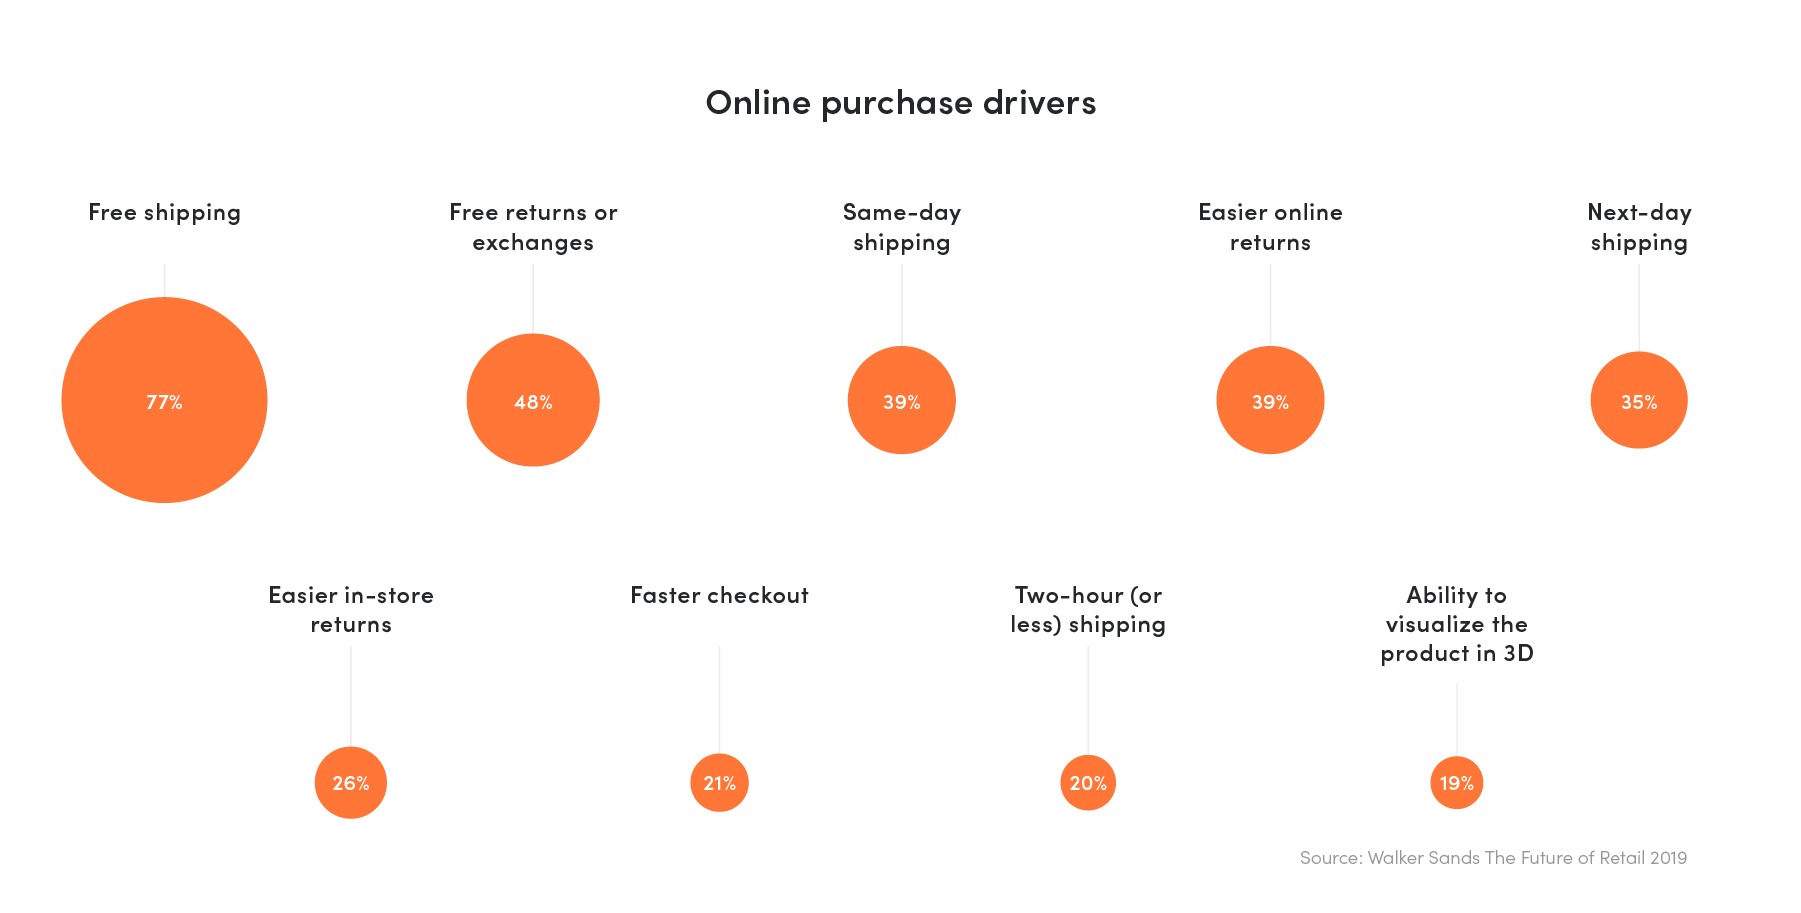 Online purchase drivers data from 2019 Future of Retail report